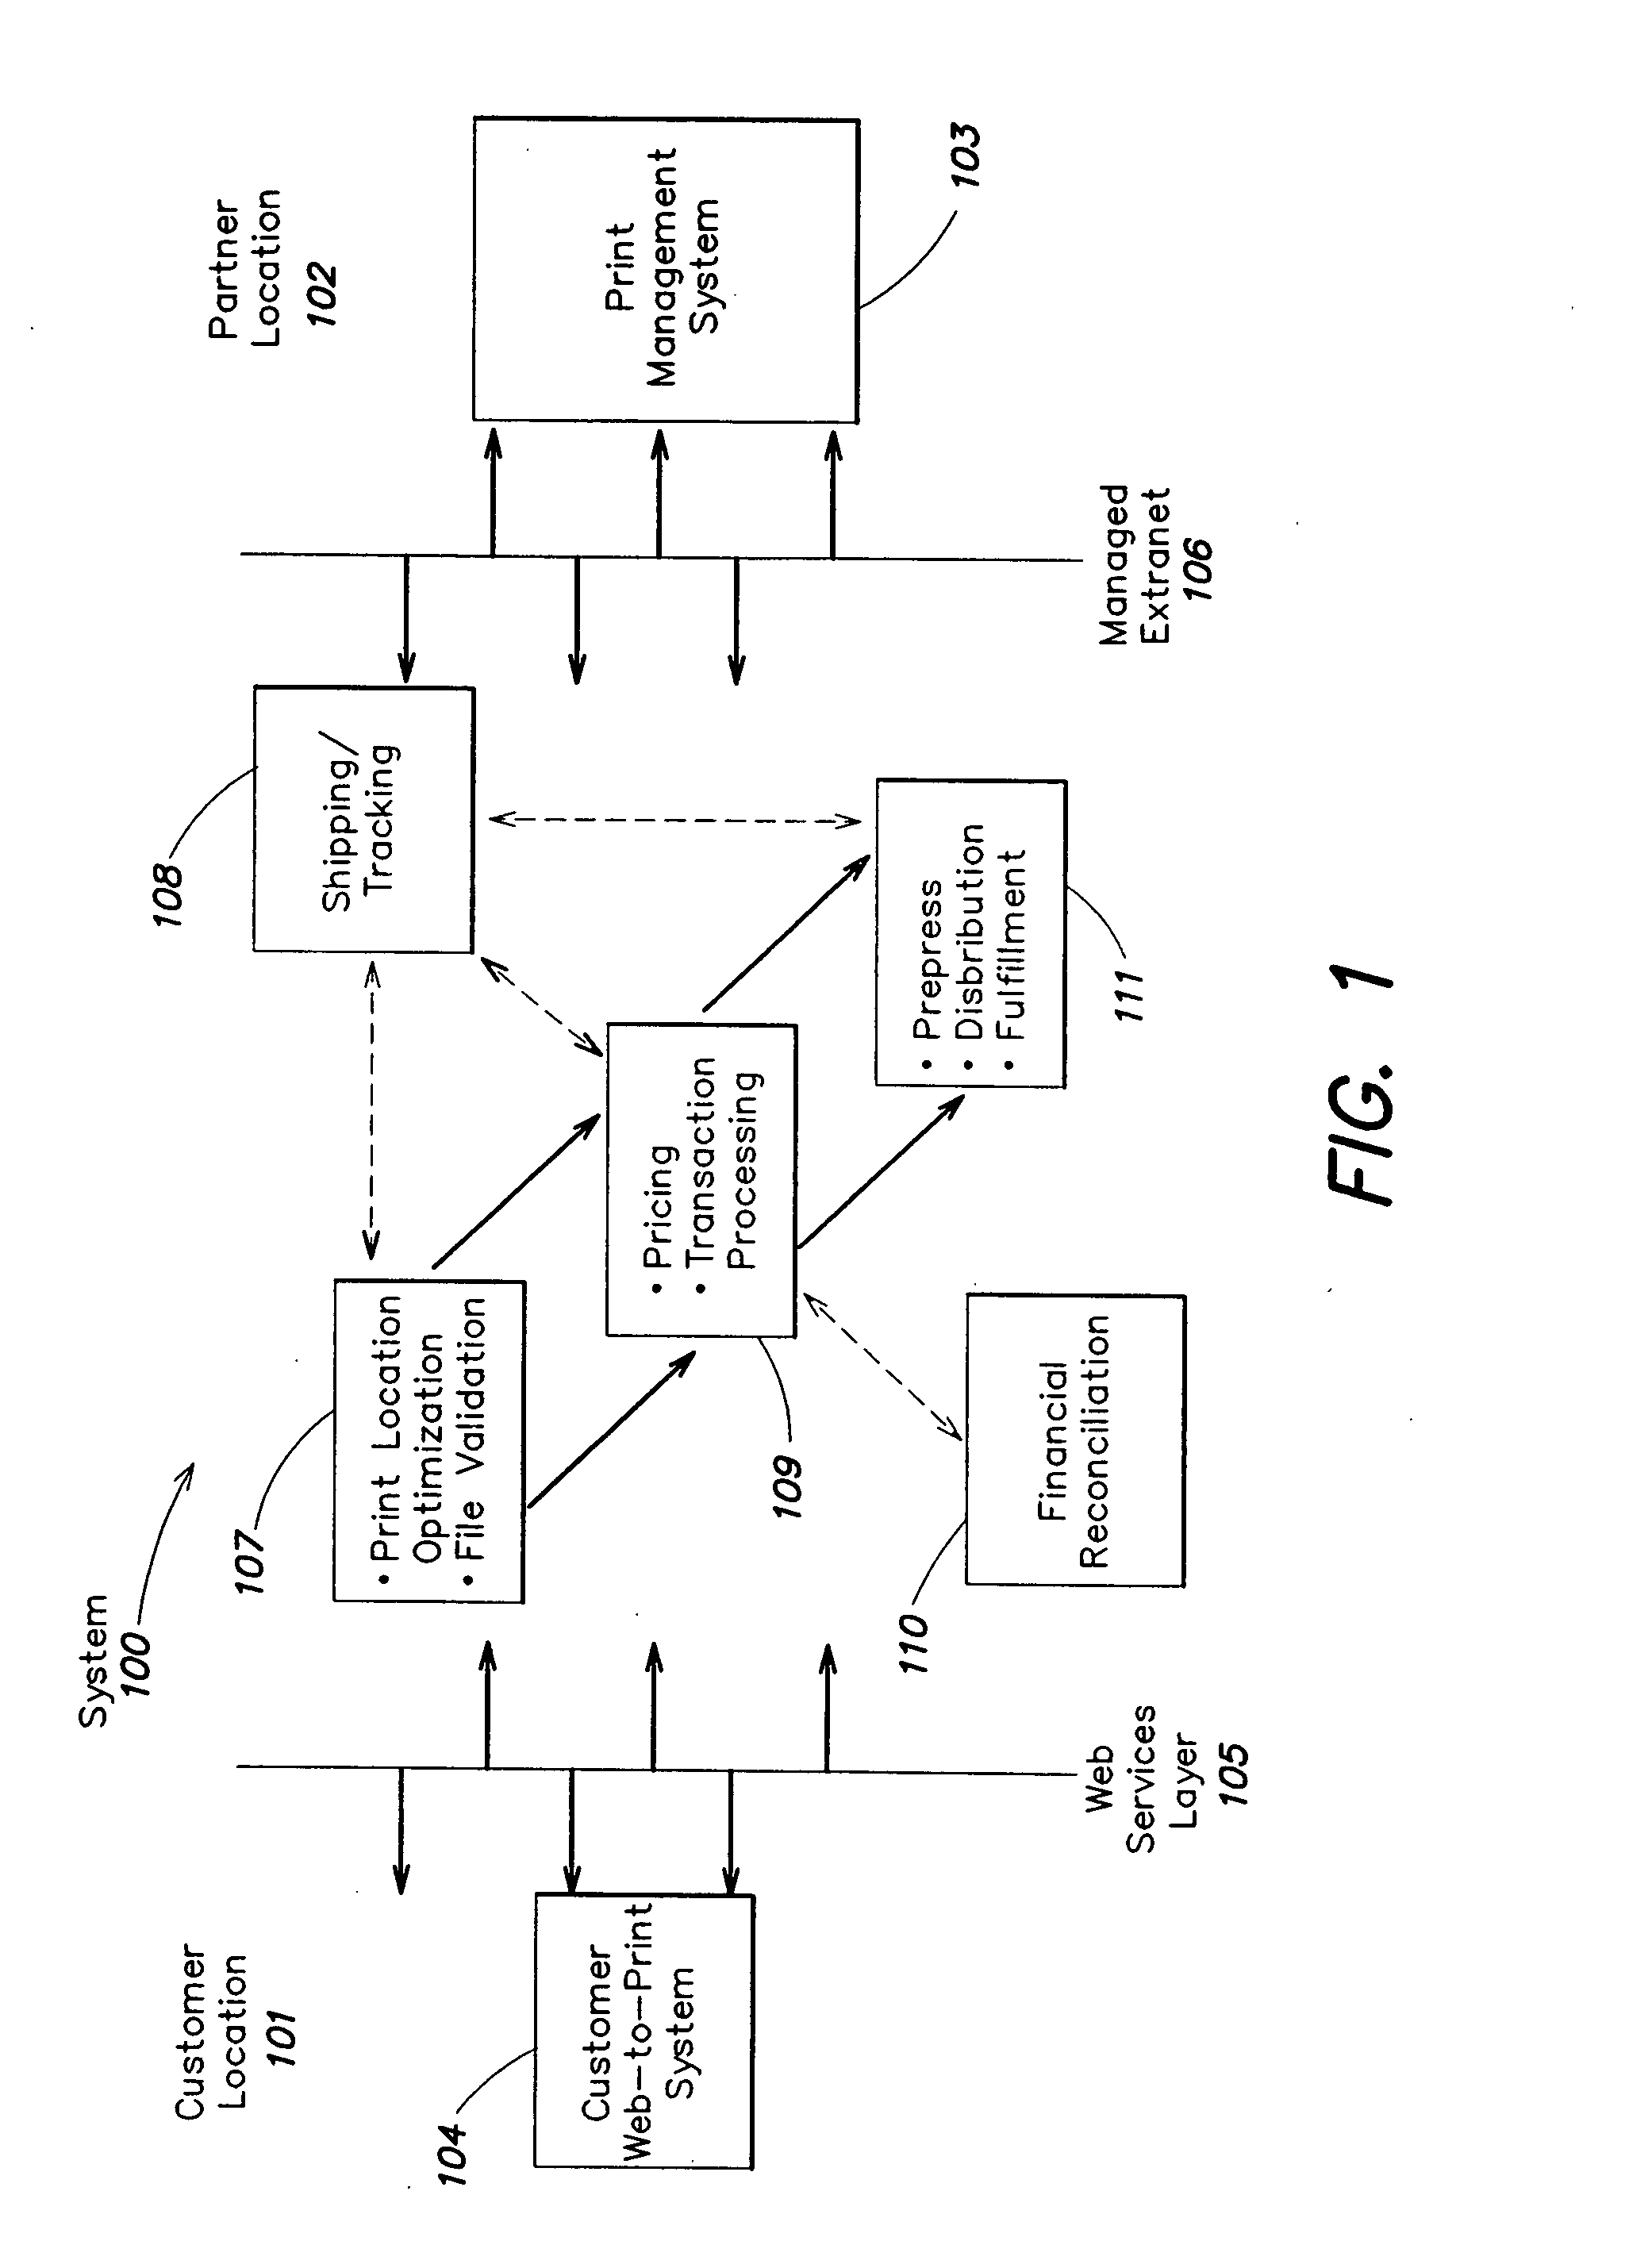 Method and apparatus for printing in a distributed communications network